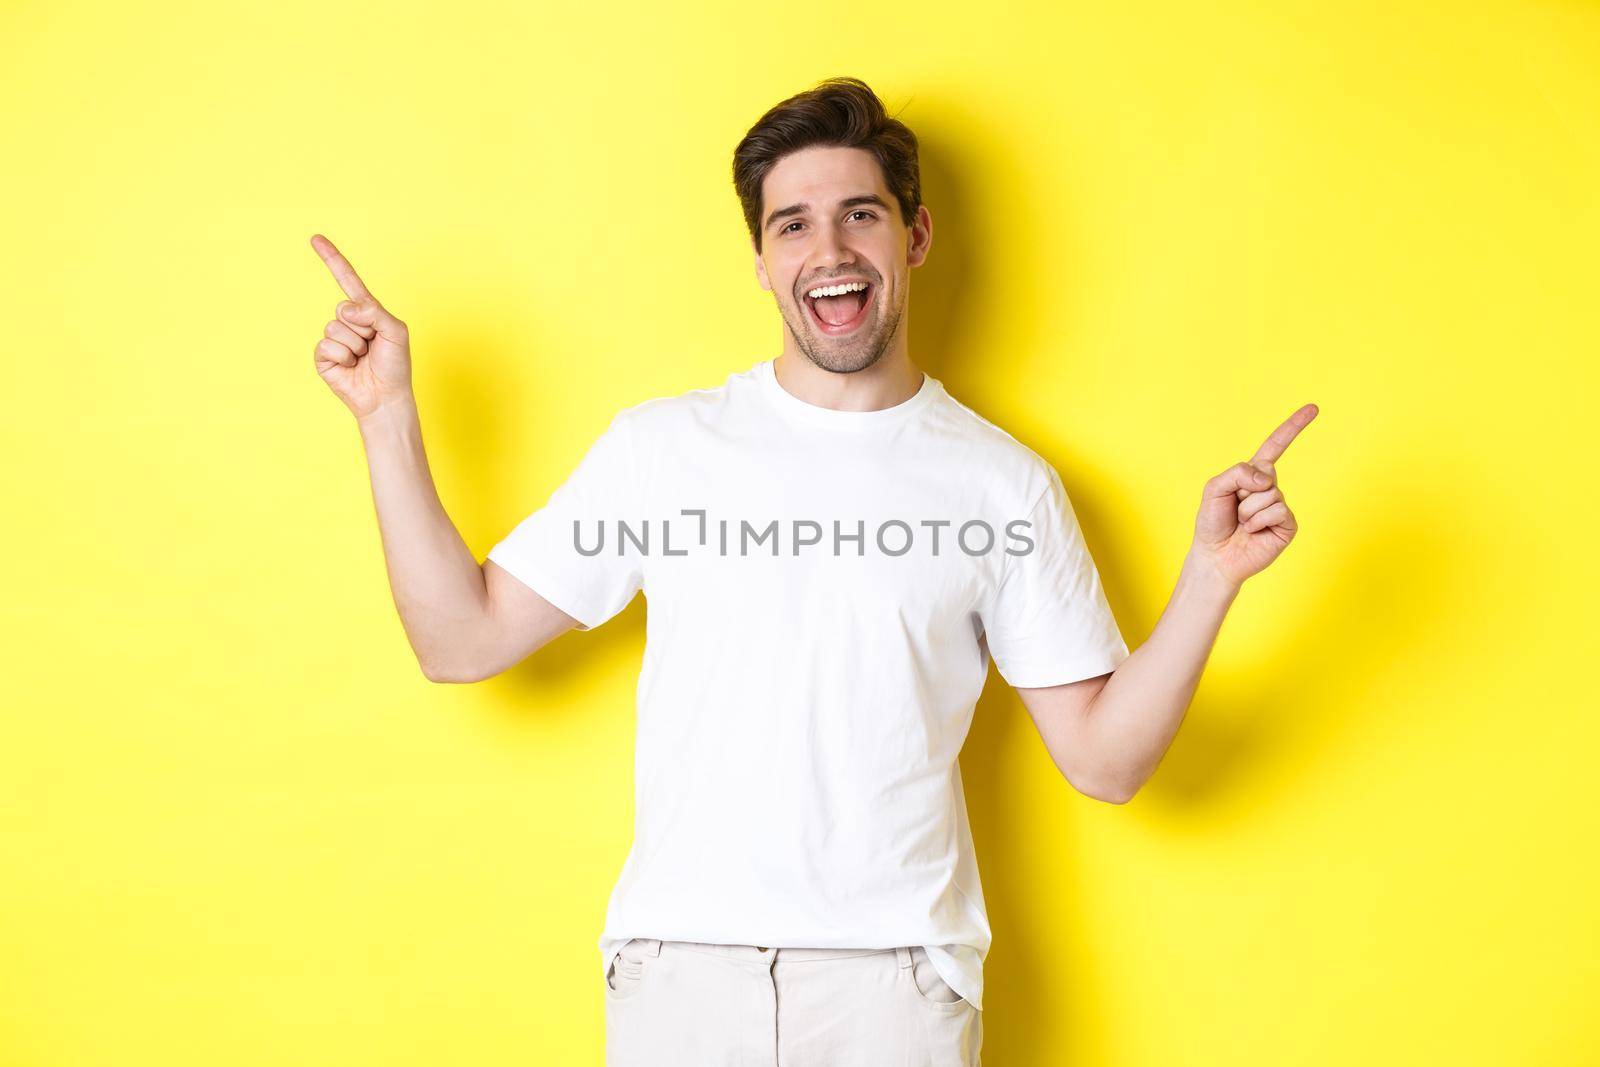 Happy stylish guy showing two variants, pointing fingers sideways at left and right promo, standing over yellow background.